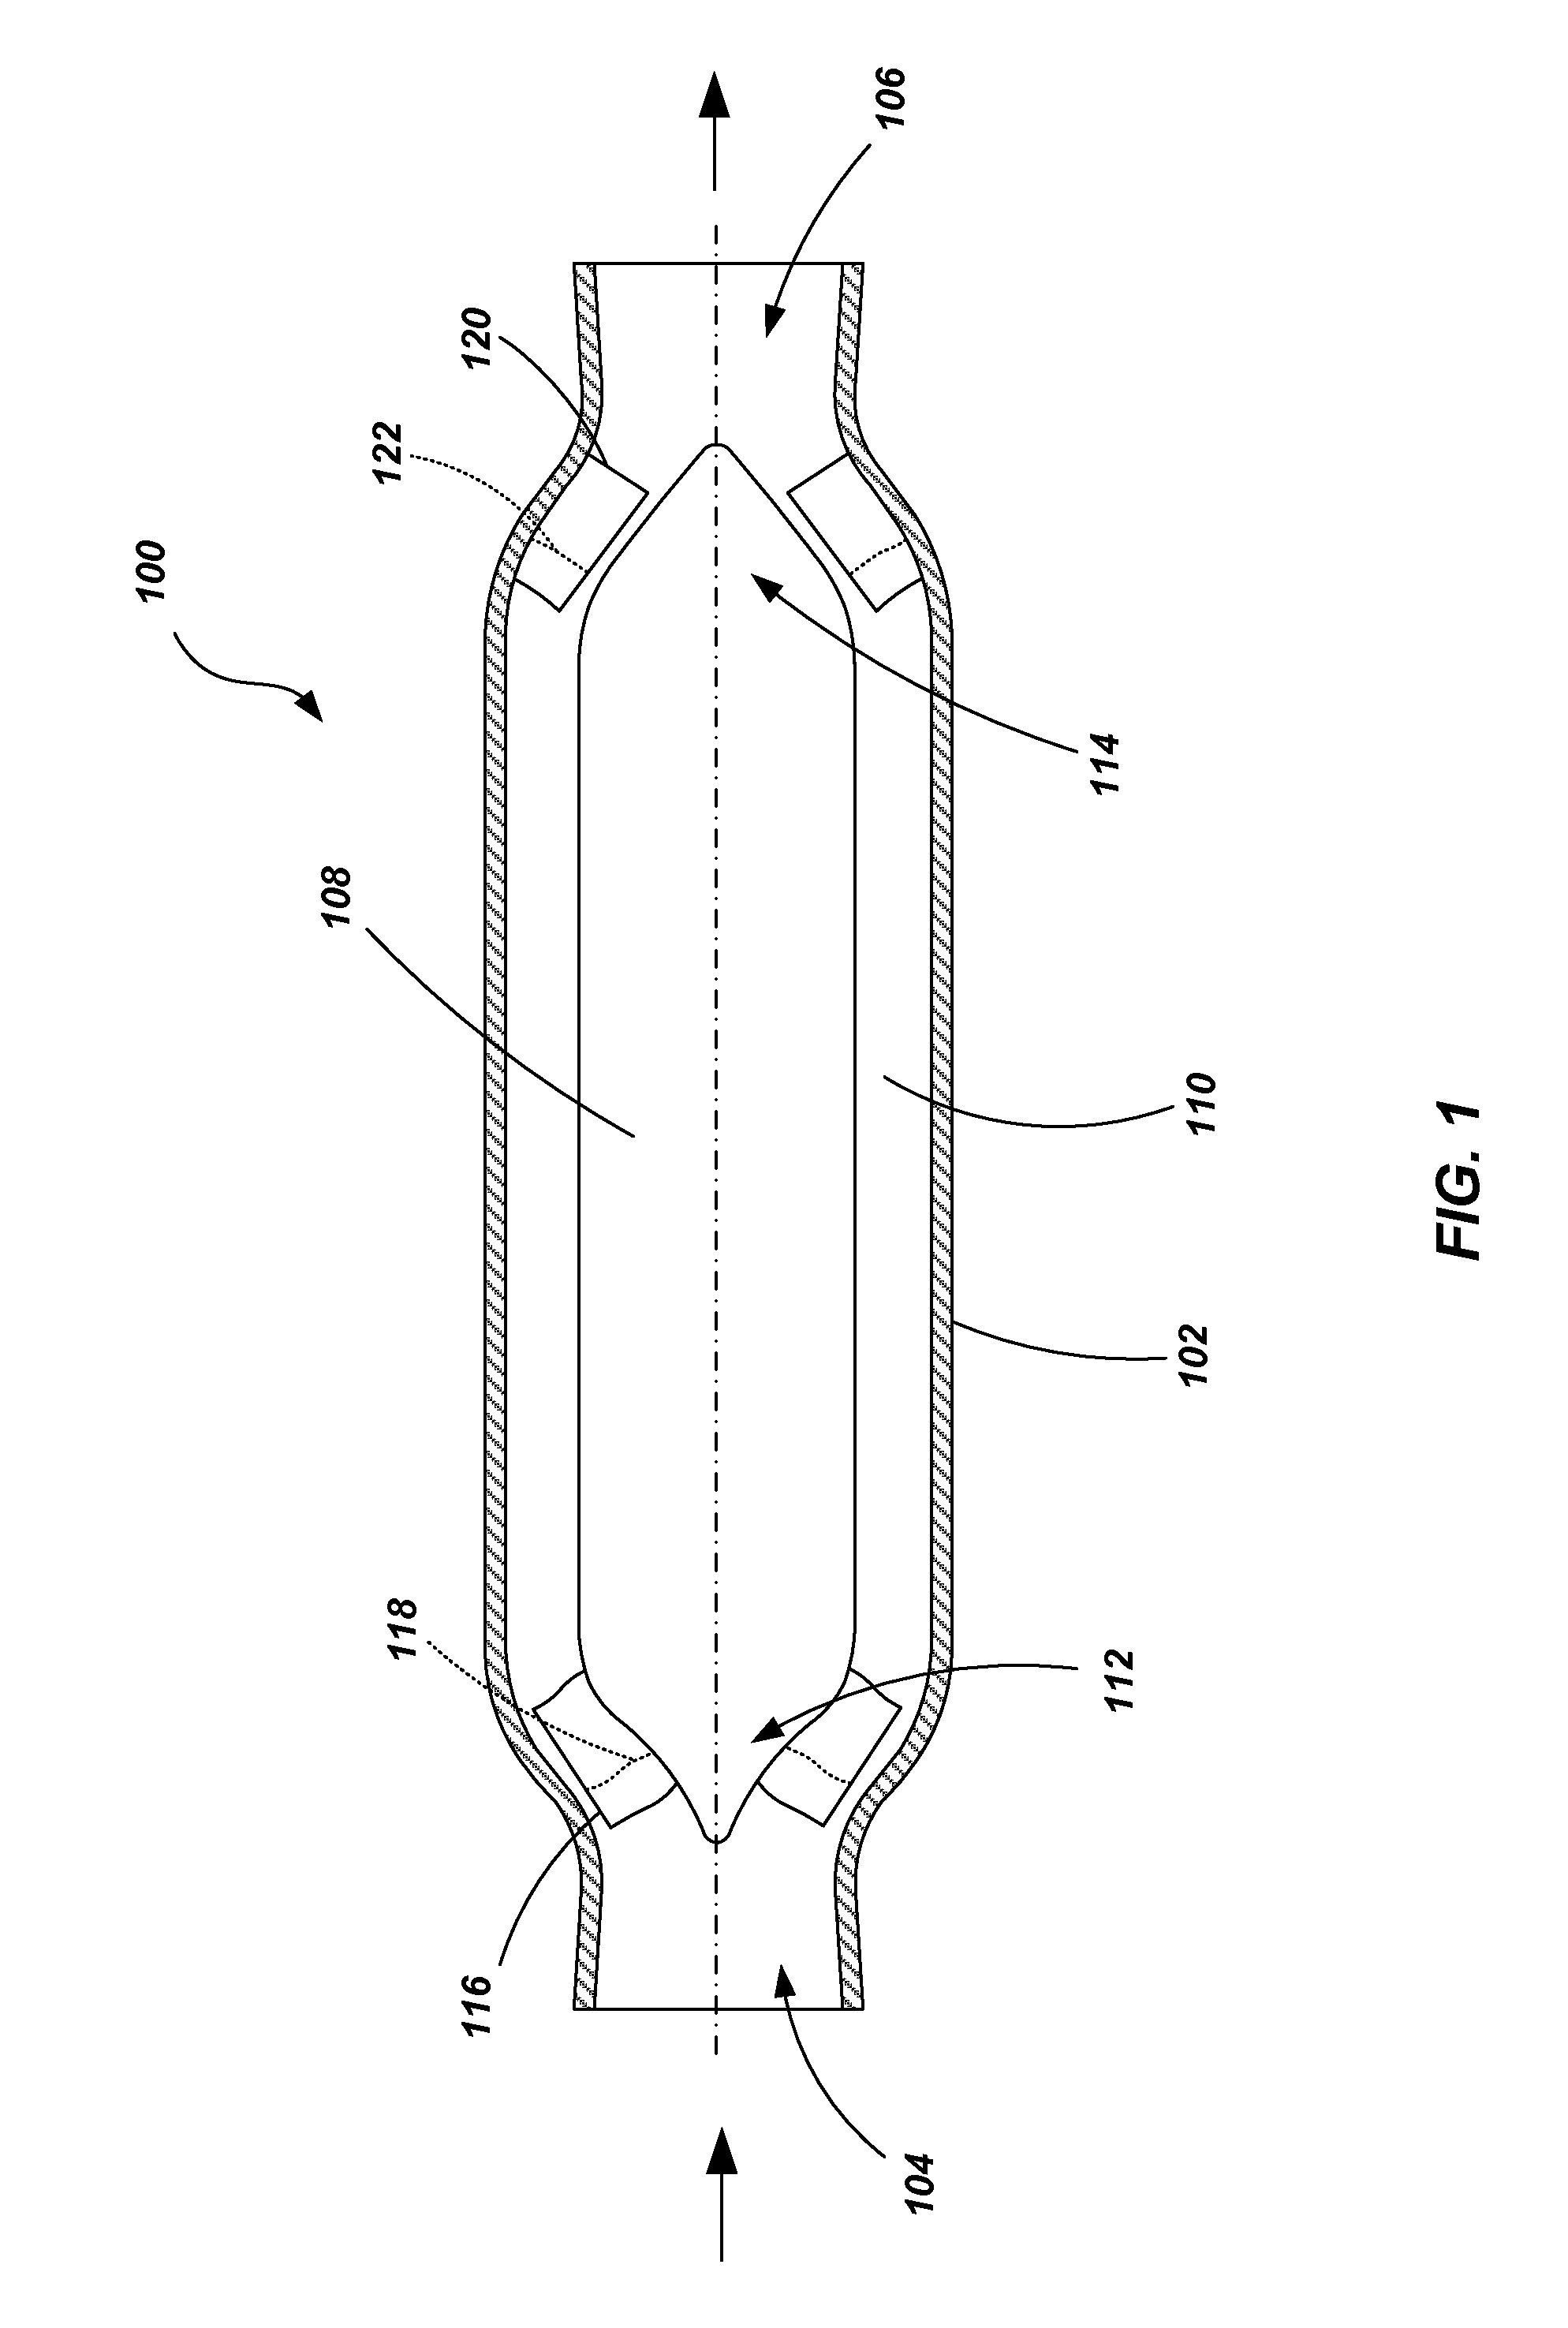 Blood pump with splitter impeller blades and splitter stator vanes and related methods